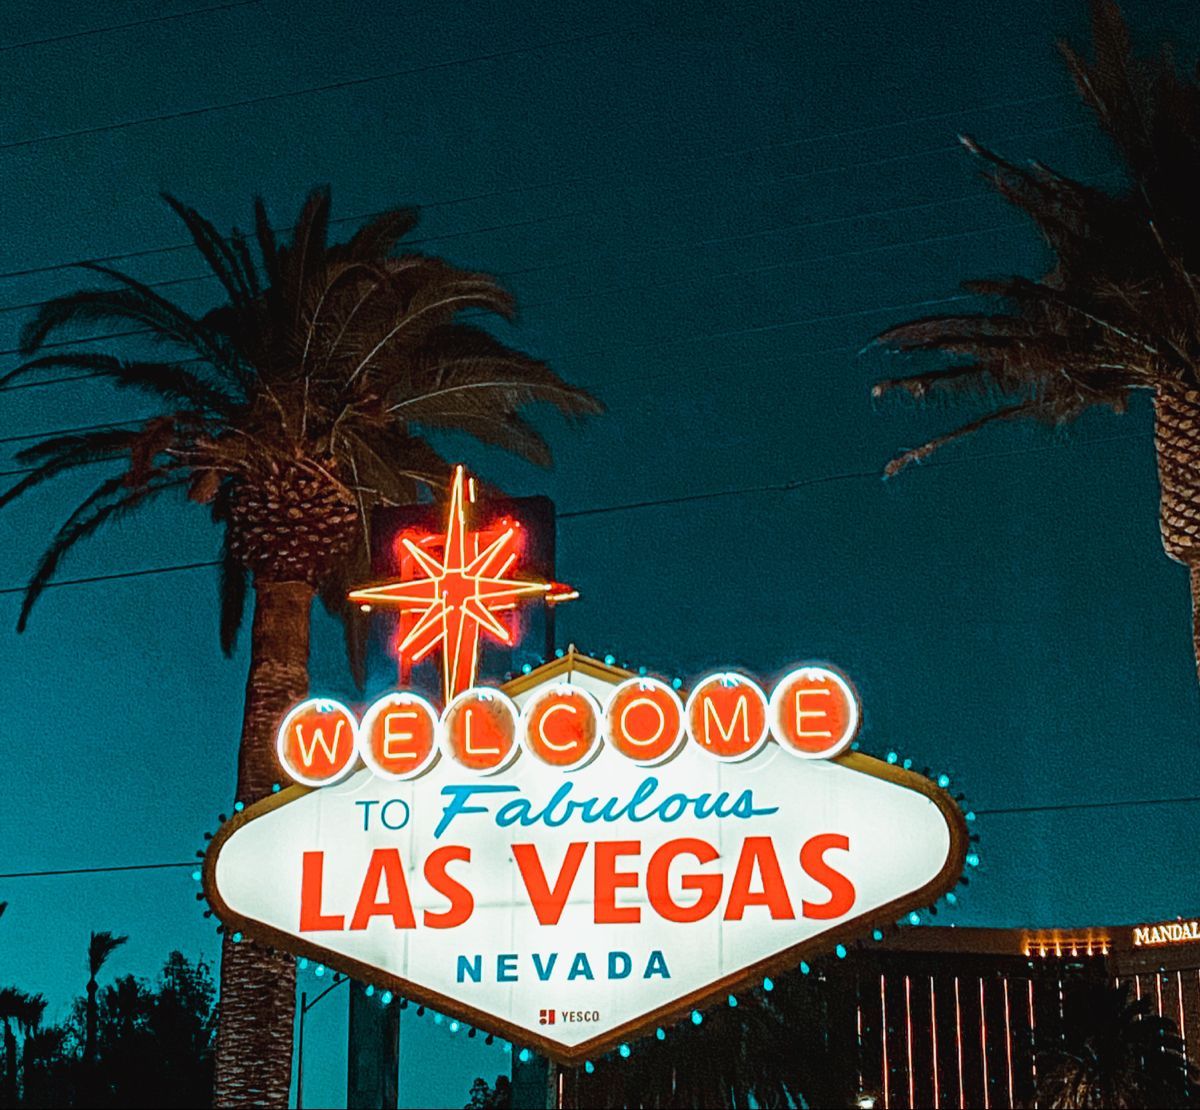 A sign that is lit up at night - Las Vegas